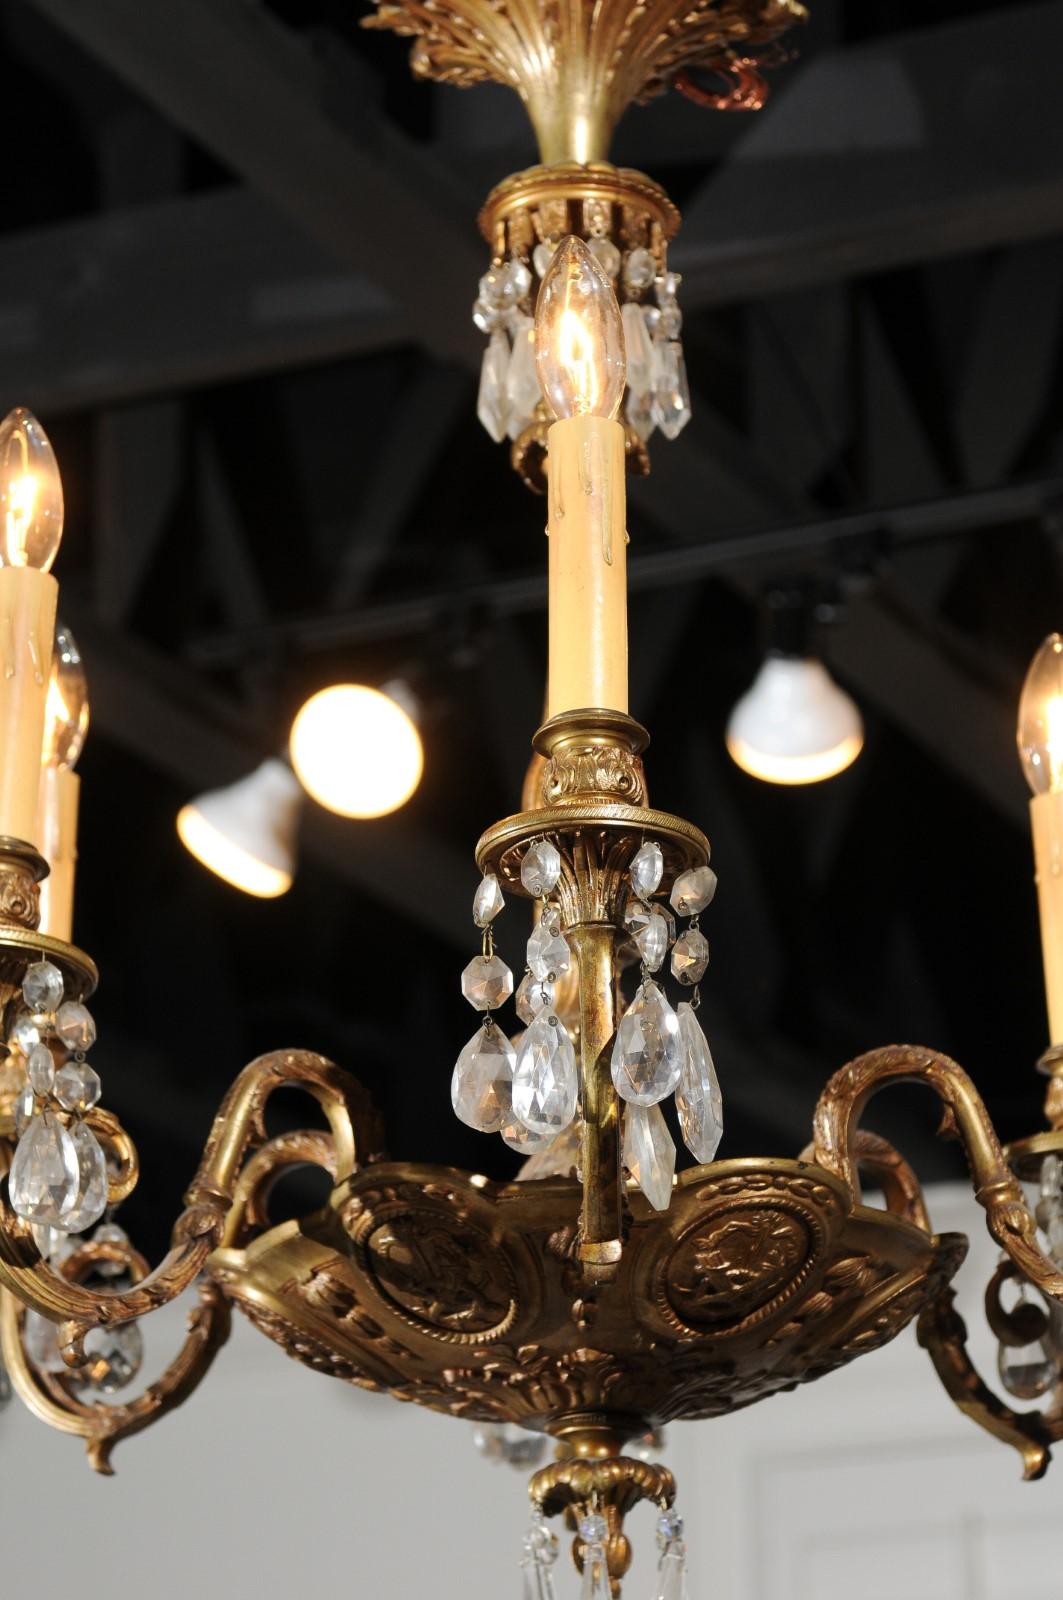 19th Century French Louis XVI Style Bronze and Crystal Six-Light Chandelier with Foliage